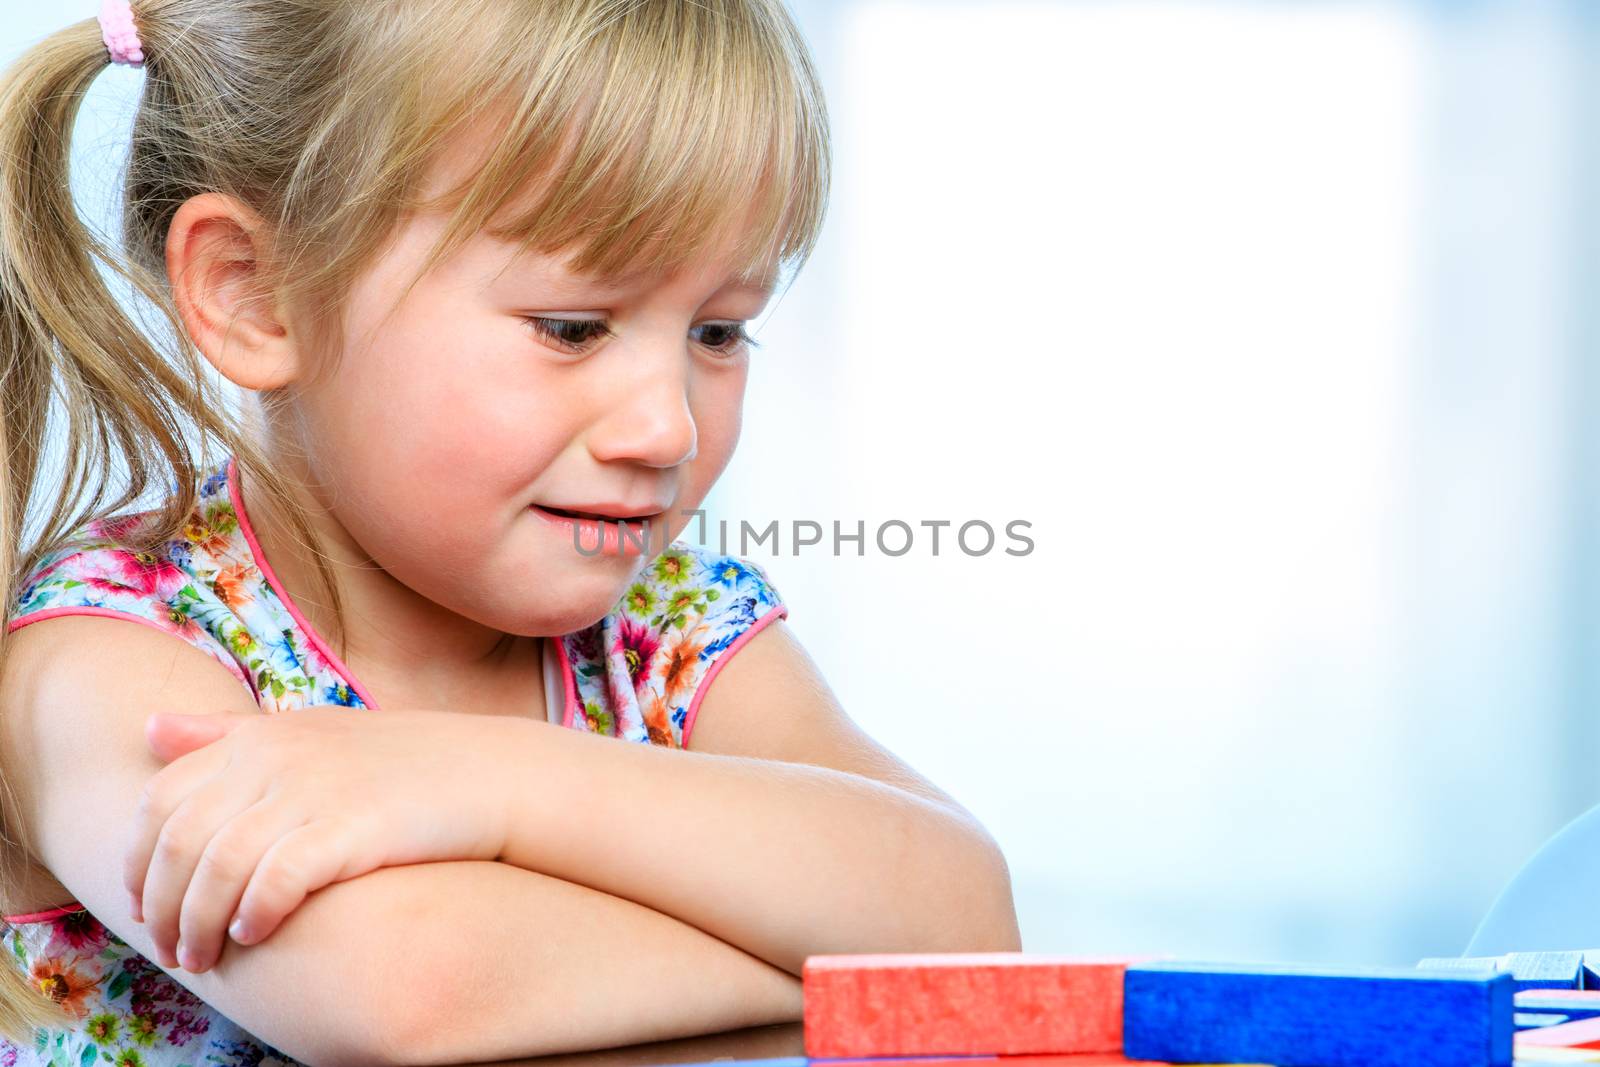 Frustrated youngster at table with game. by karelnoppe